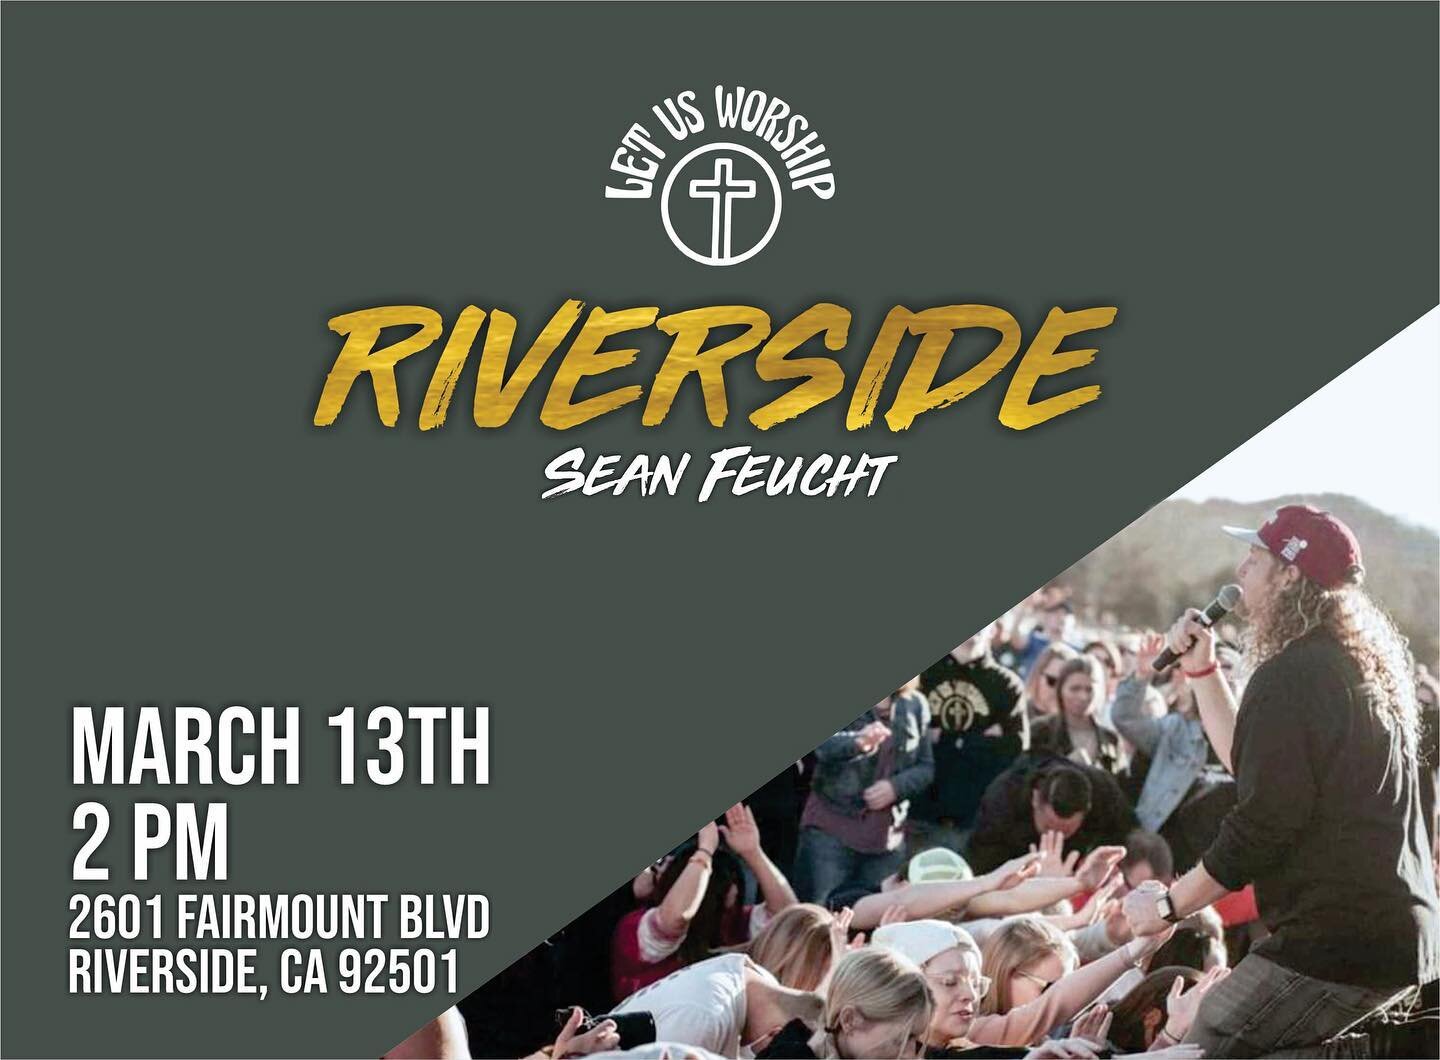 My church is partnering with Sean Feucht this weekend at FAIRMONT PARK in Riverside, CA!! 

Join is for Revival 🔥

#thisrockinternationalministries